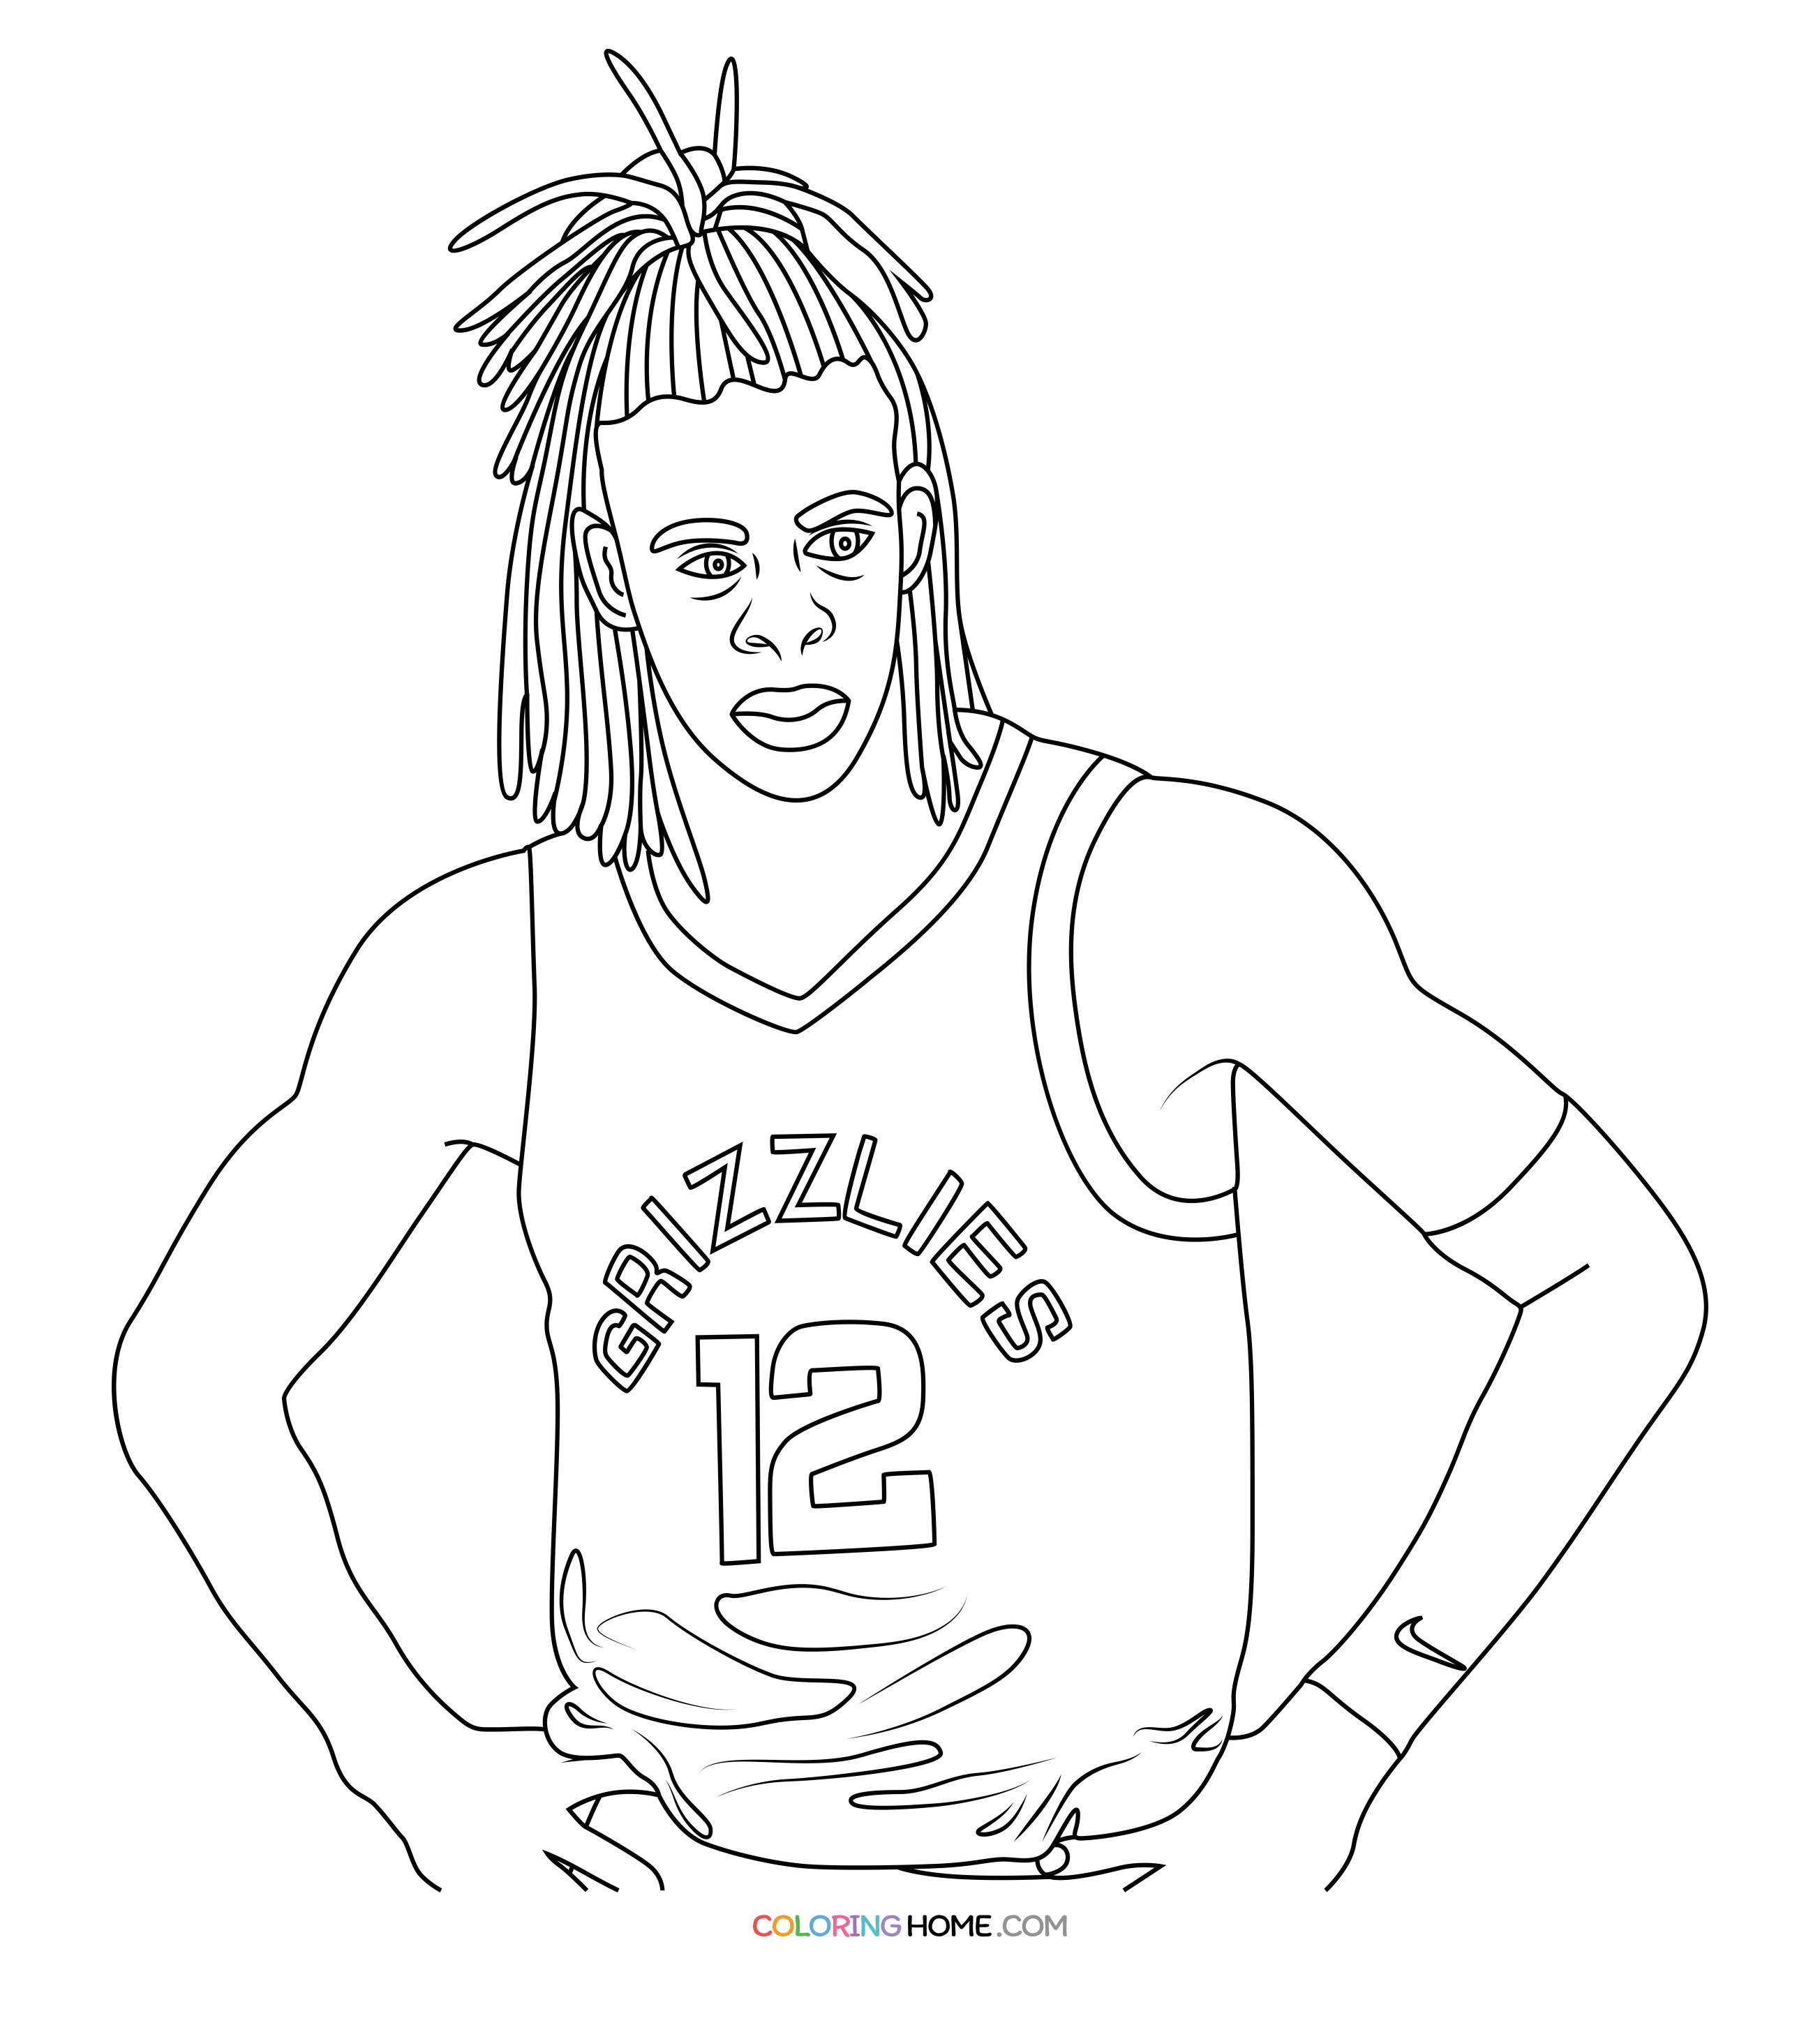 Ja Morant coloring page